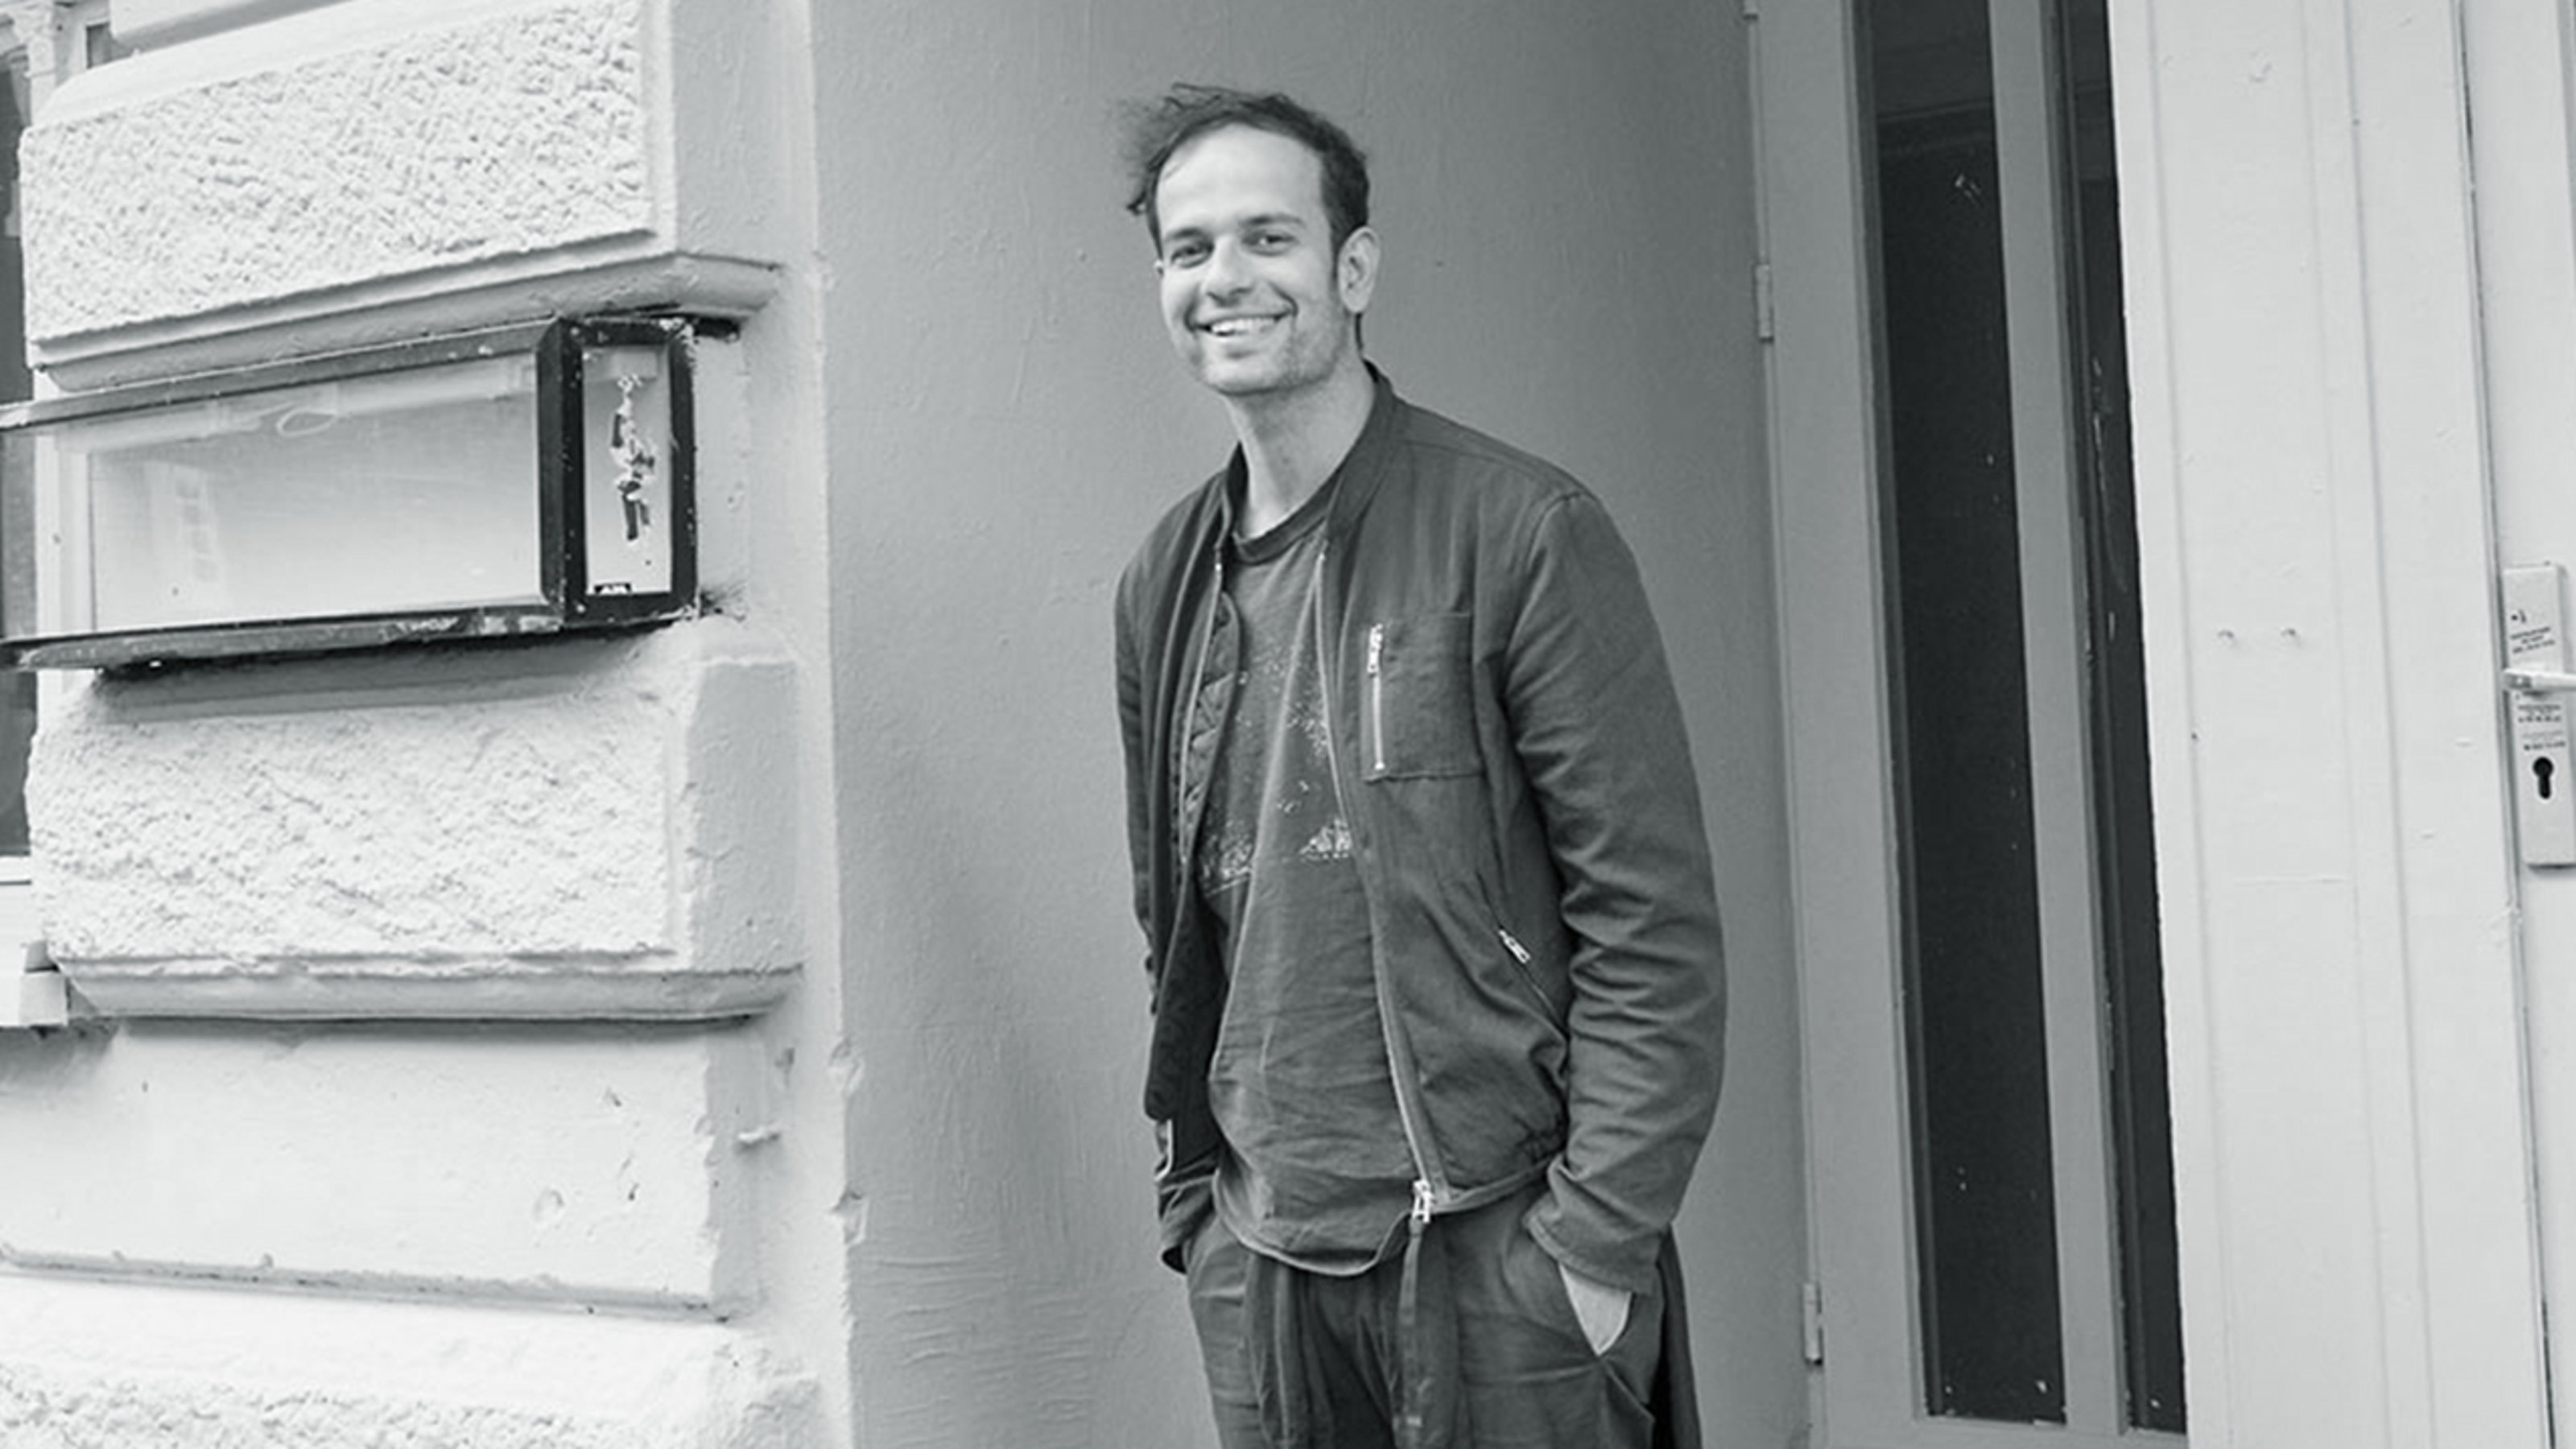 Black and white image of Tino Sehgal standing in front of a building and smiling at the camera